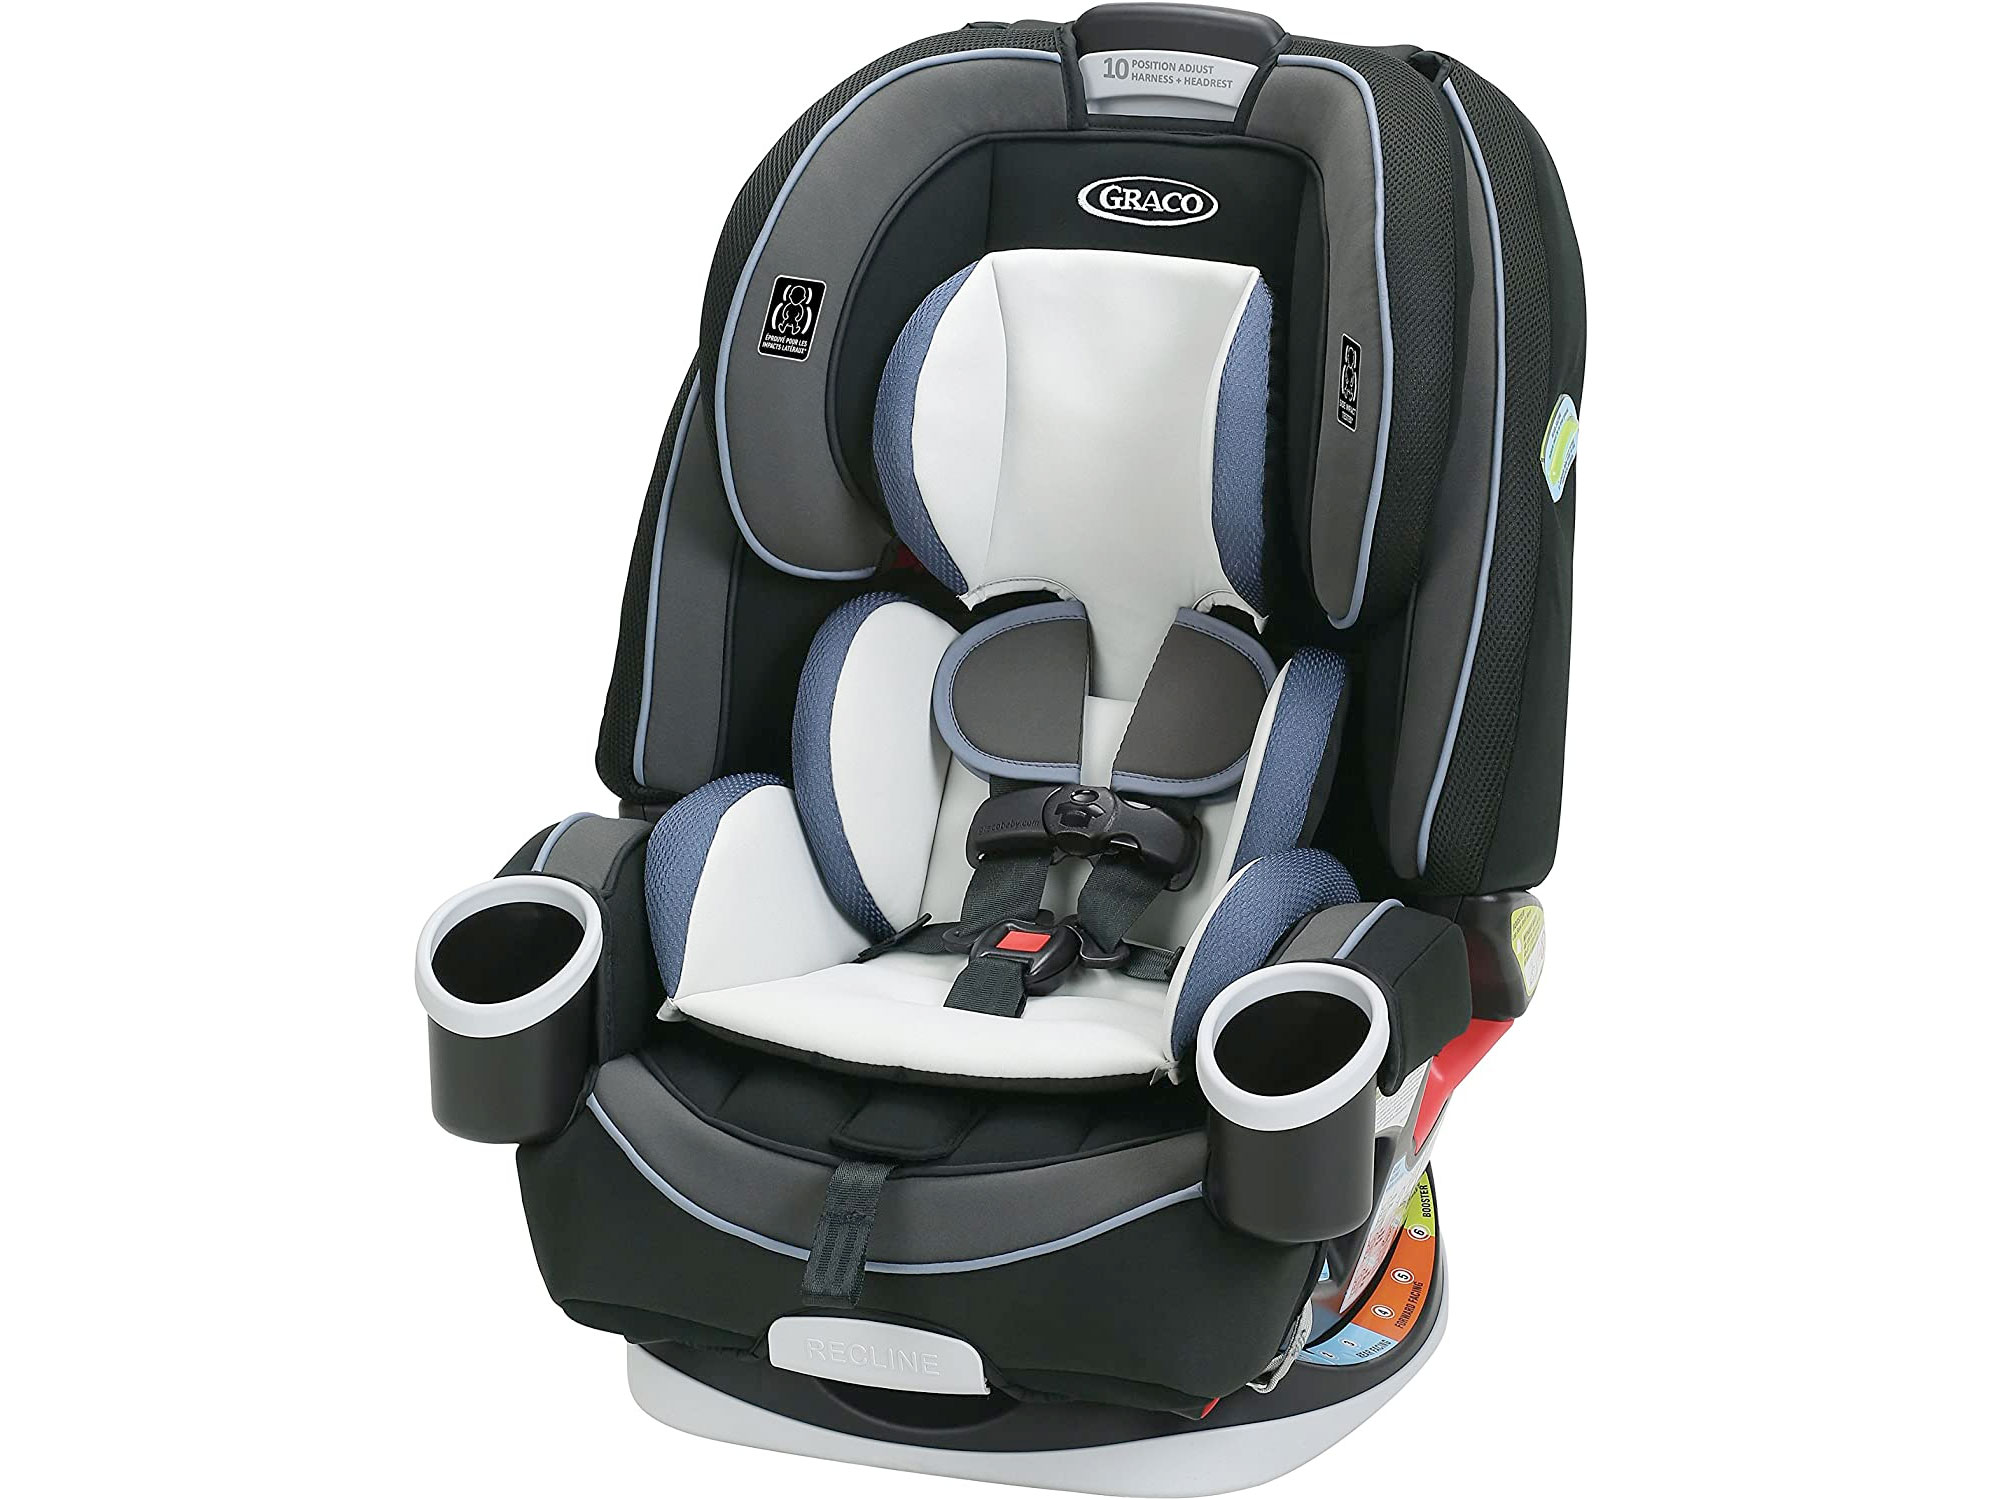 Amazon：Graco 4Ever All-in-1 Car Seat只賣$299